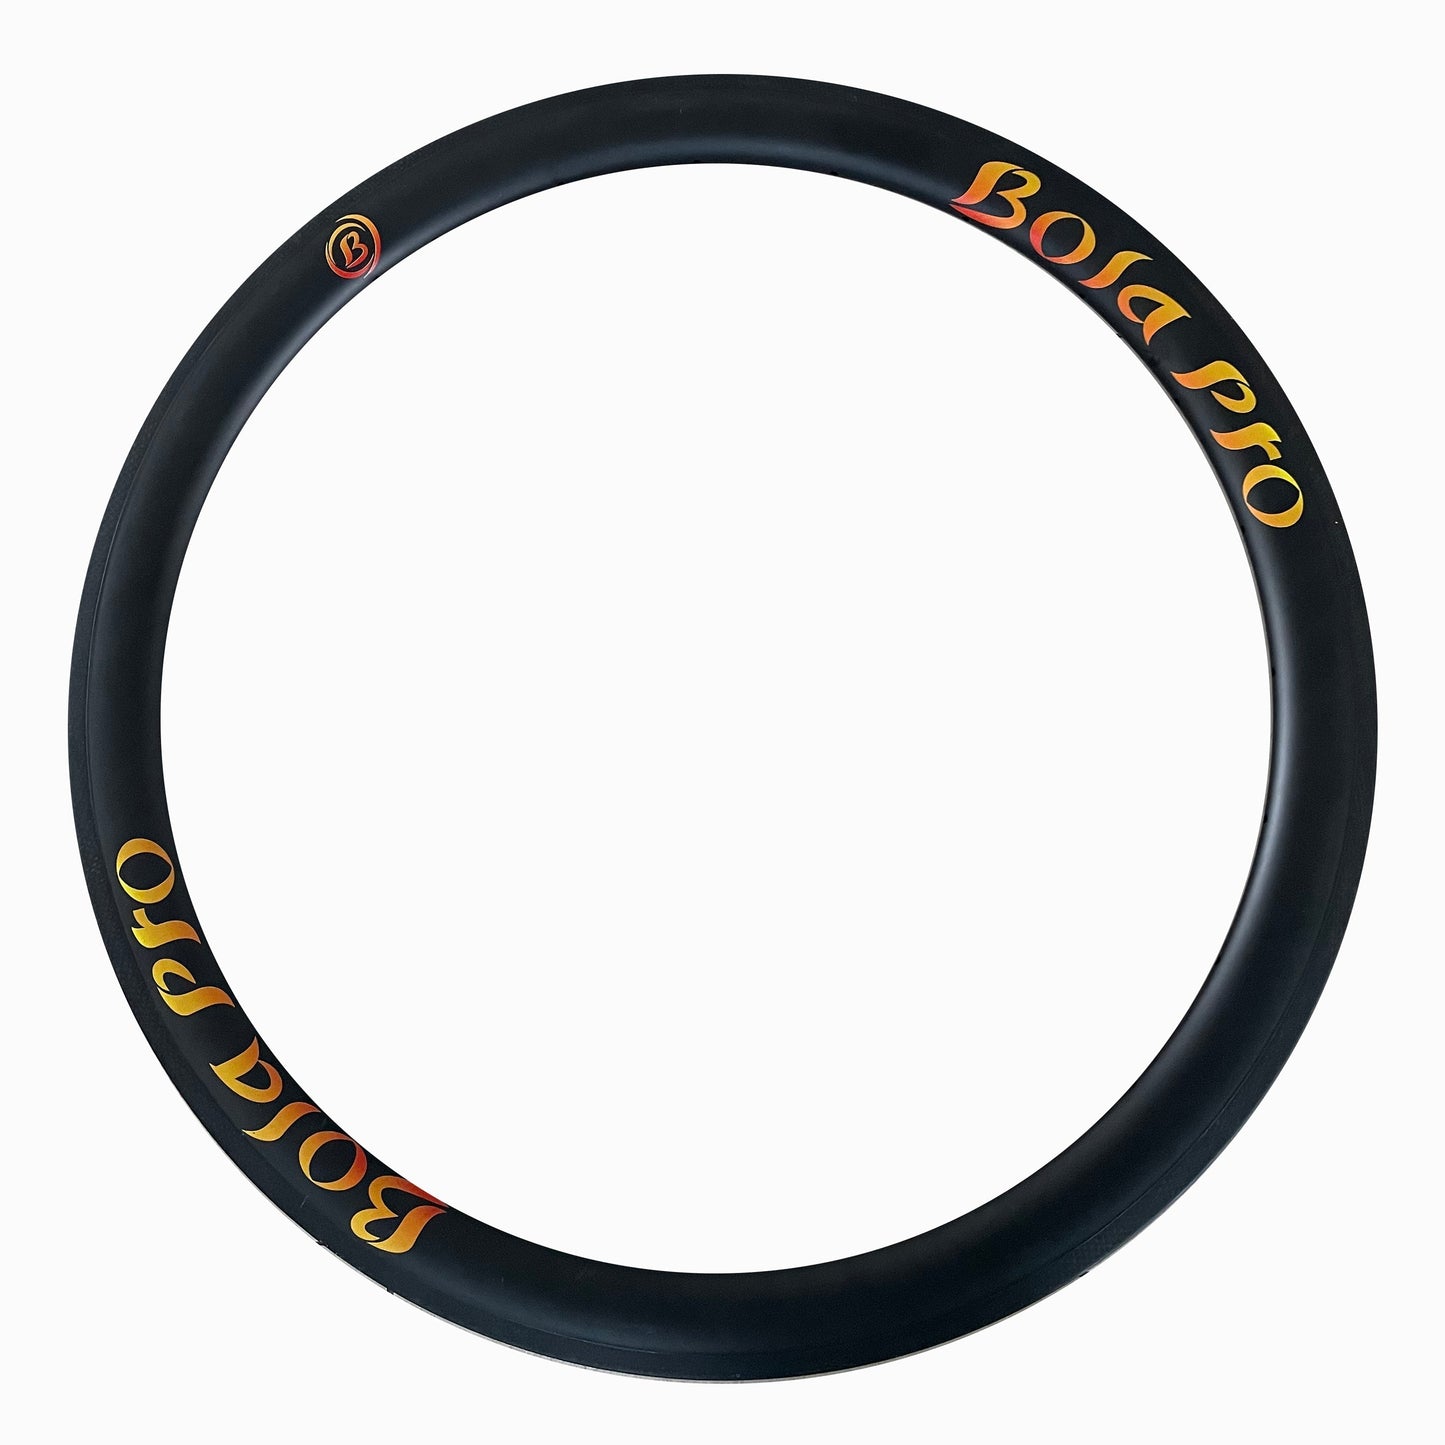 700C aerodynamic clincher carbon bicycle front rim 75mm high 25mm outer wide for triathlon